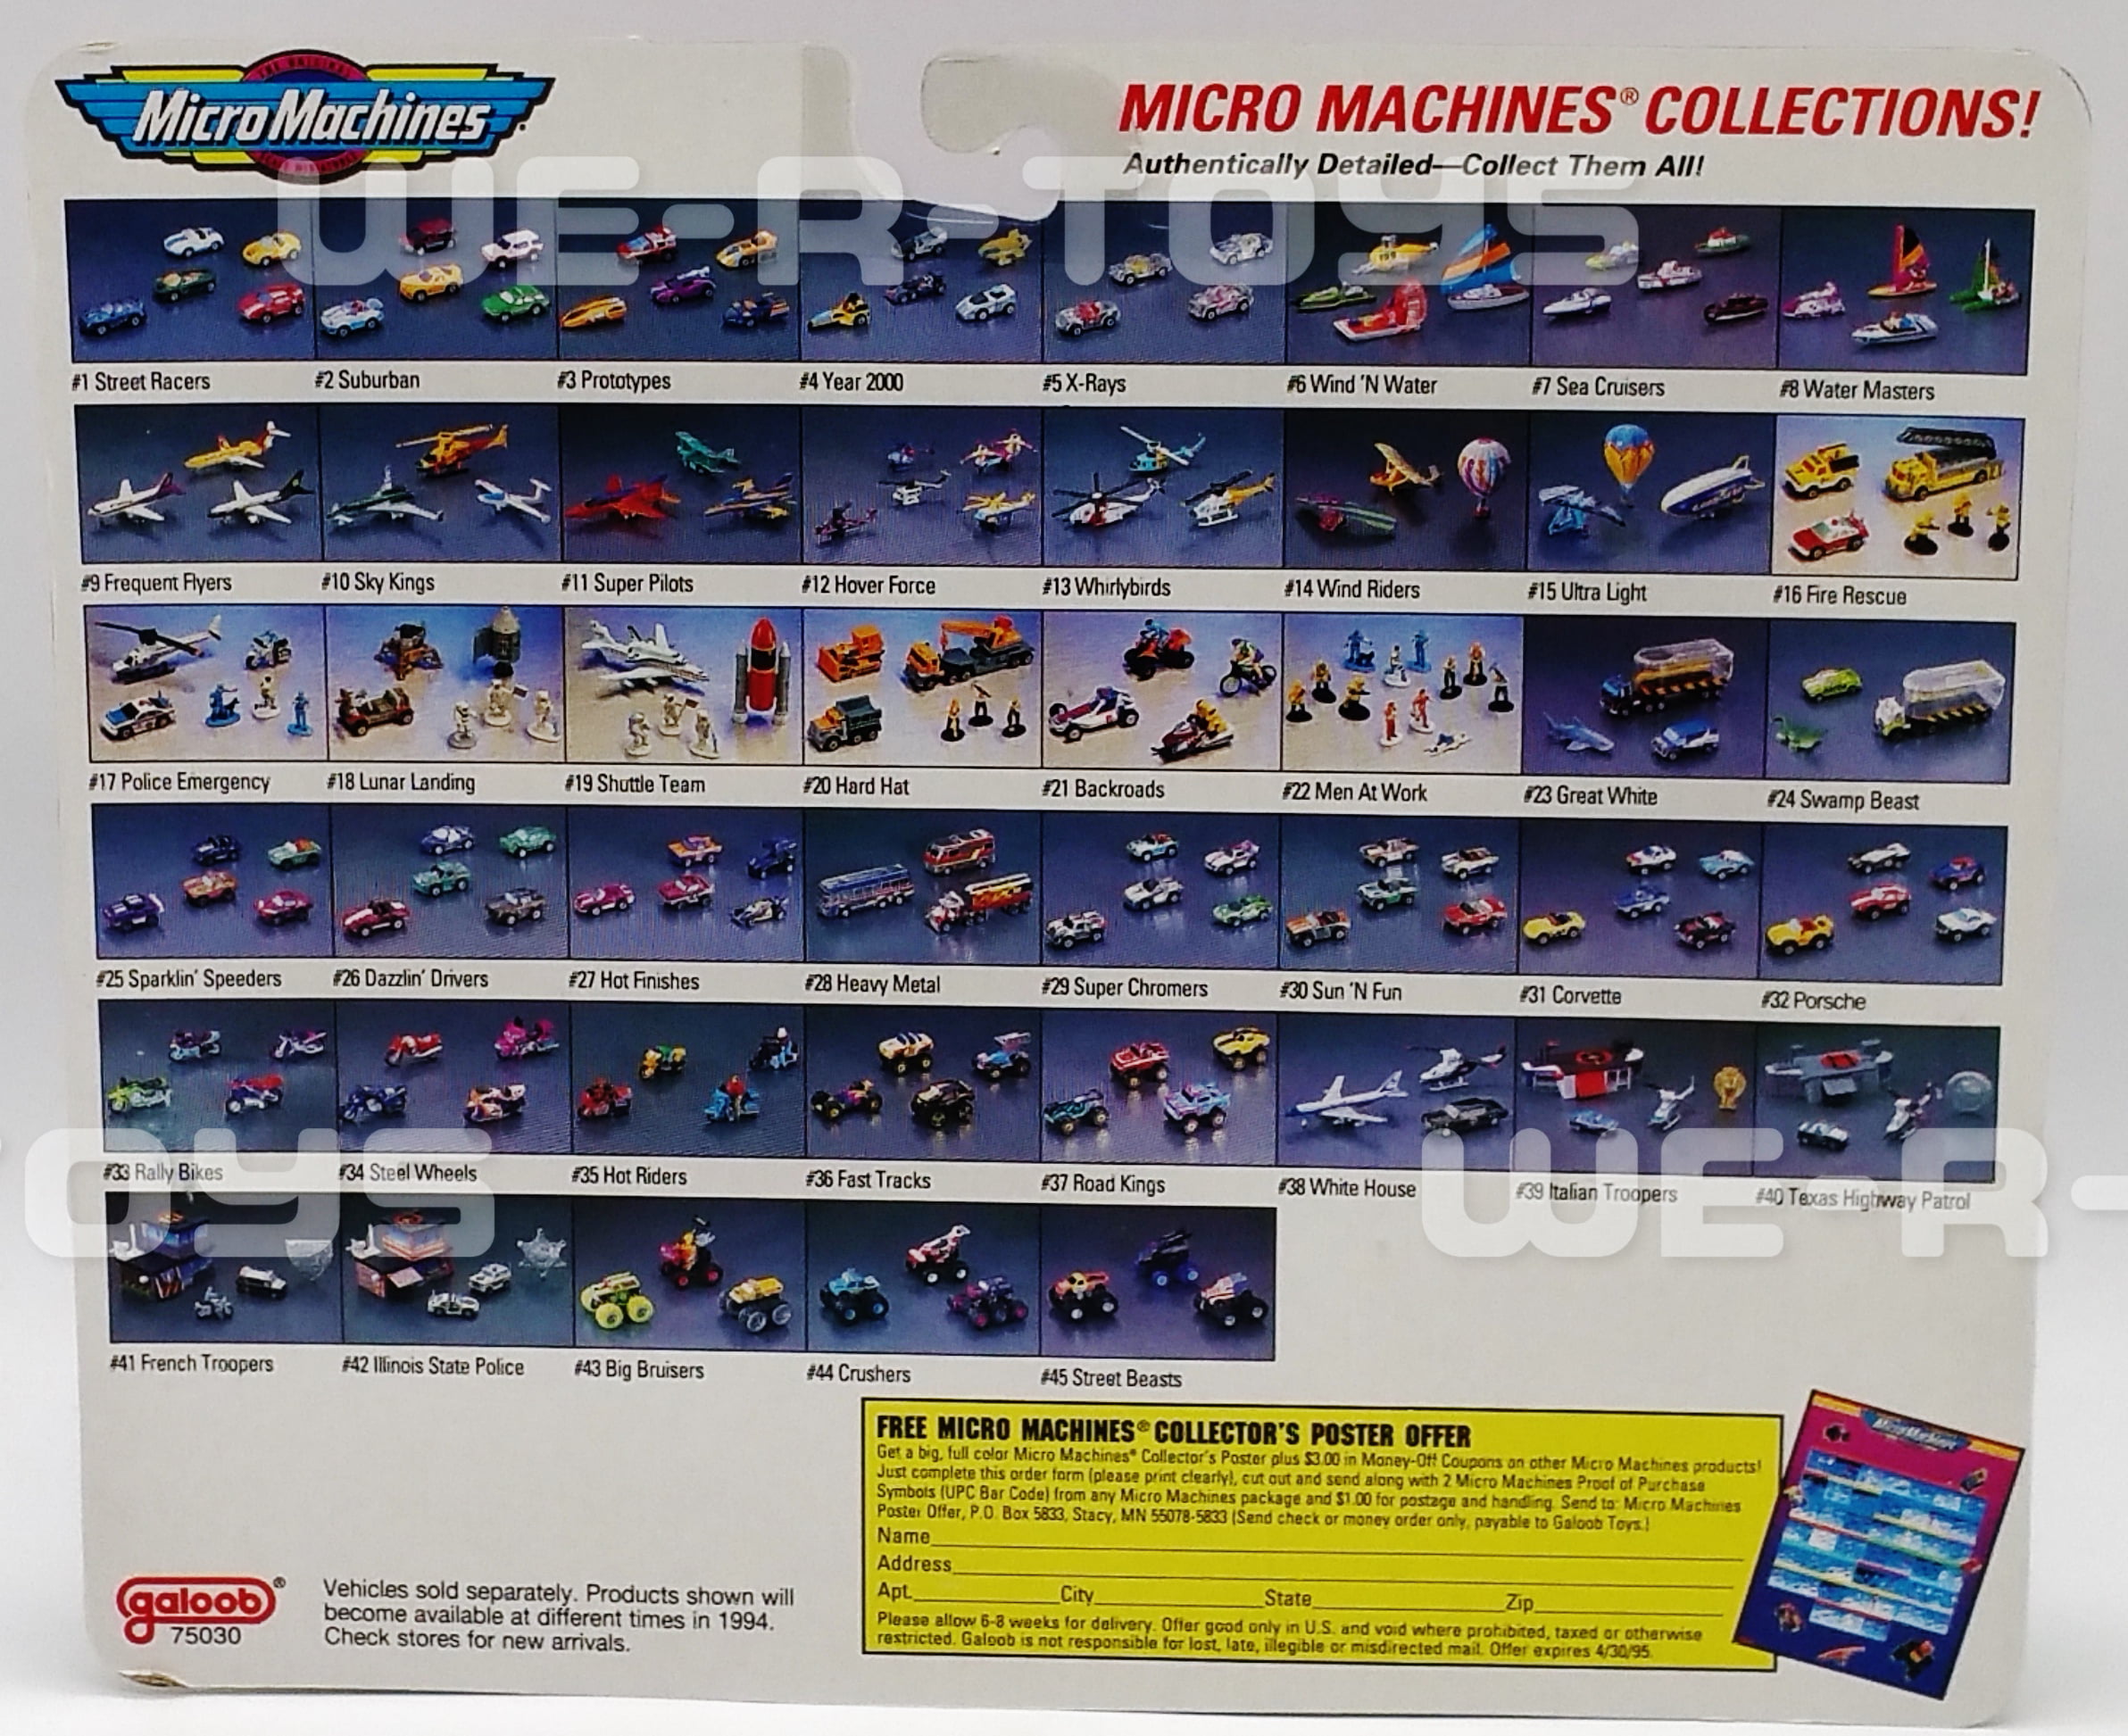 Galoob Micro Machines No. 65400 Troopers California Highway Patrol  Collection #4 Playset on Card for Sale -  - Antique Toys for  Sale